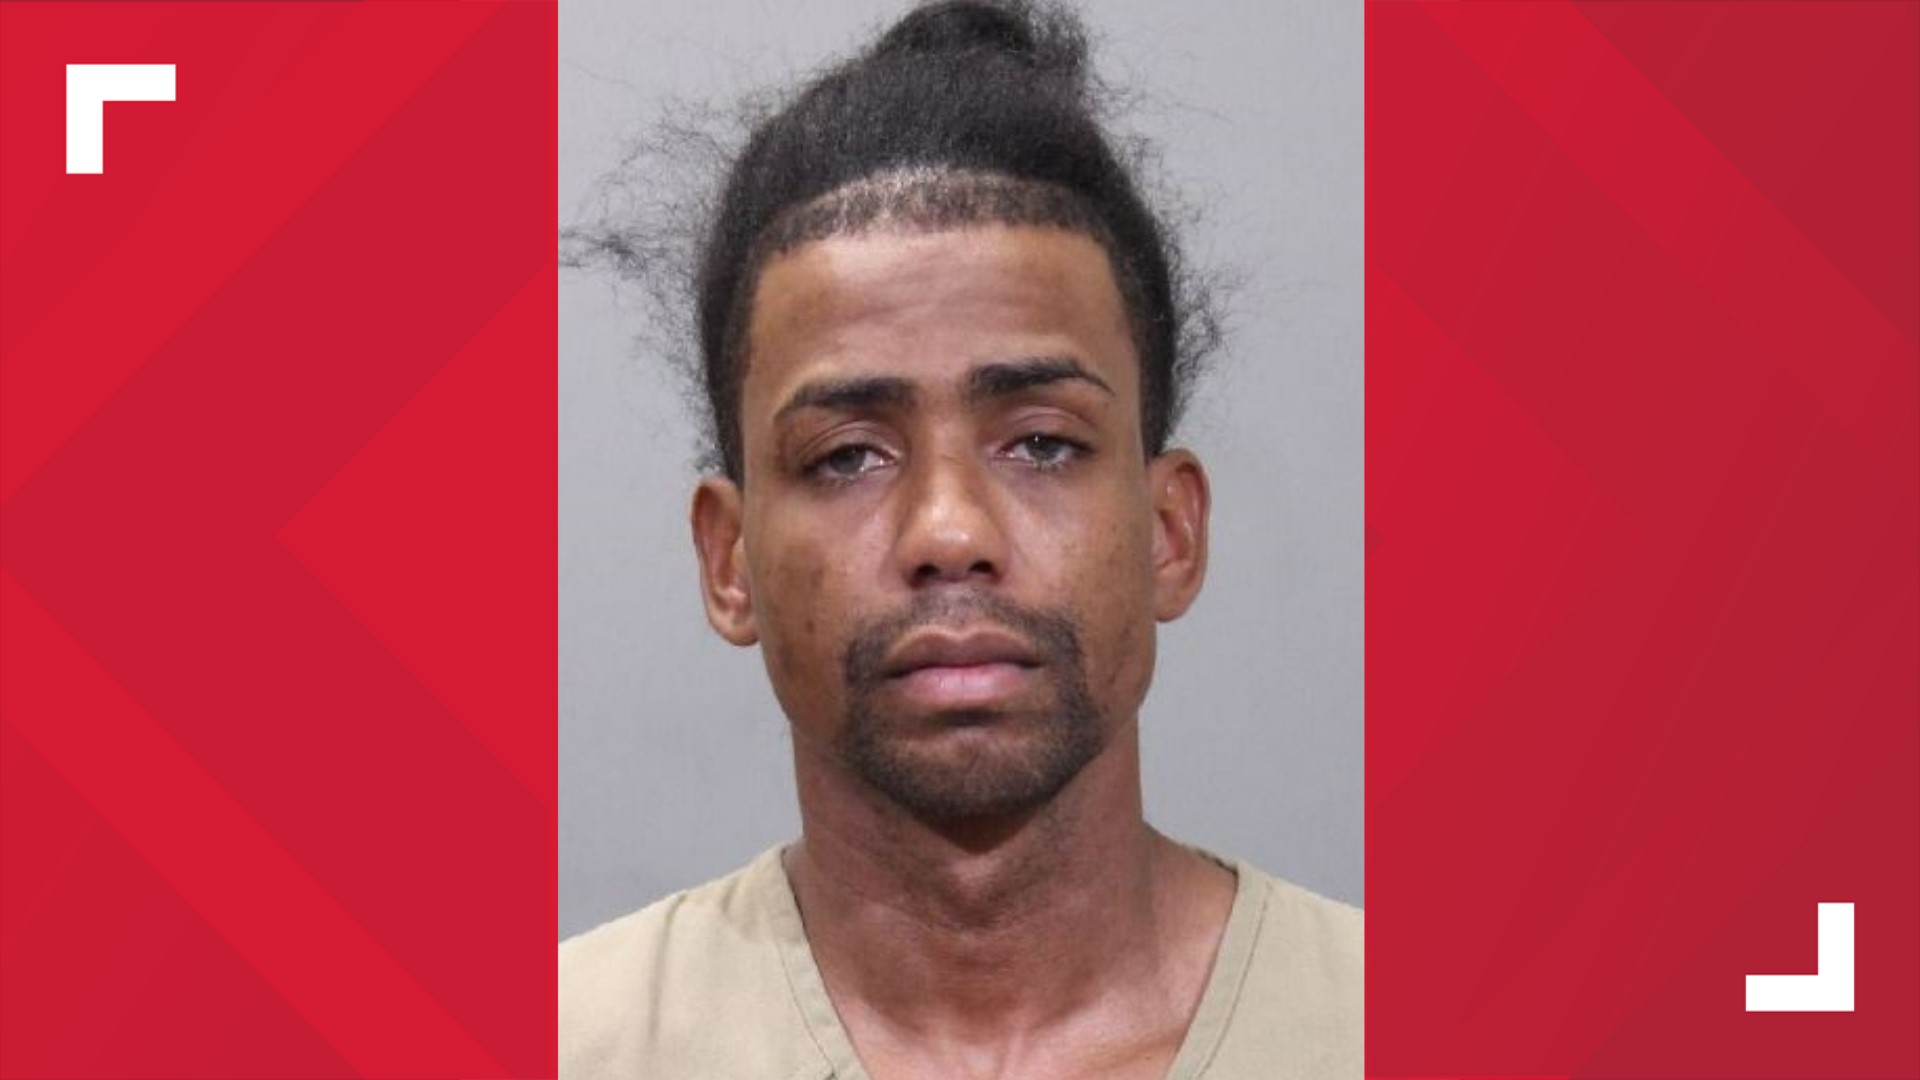 Javier Inirio is charged with the murder of Josephine Banks.